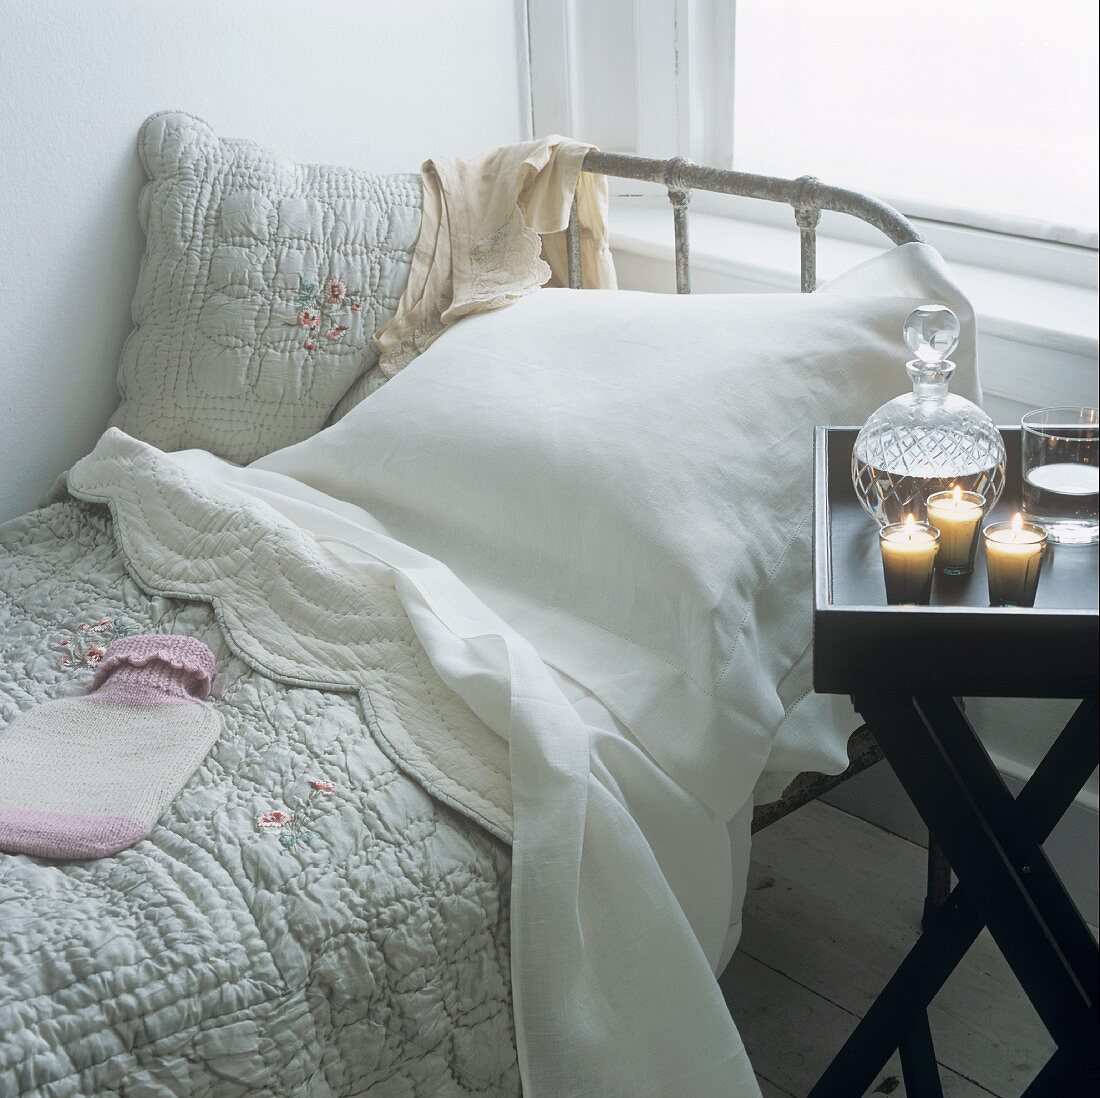 A bed with bedspread and hot water bottle and a folding table with candles and water